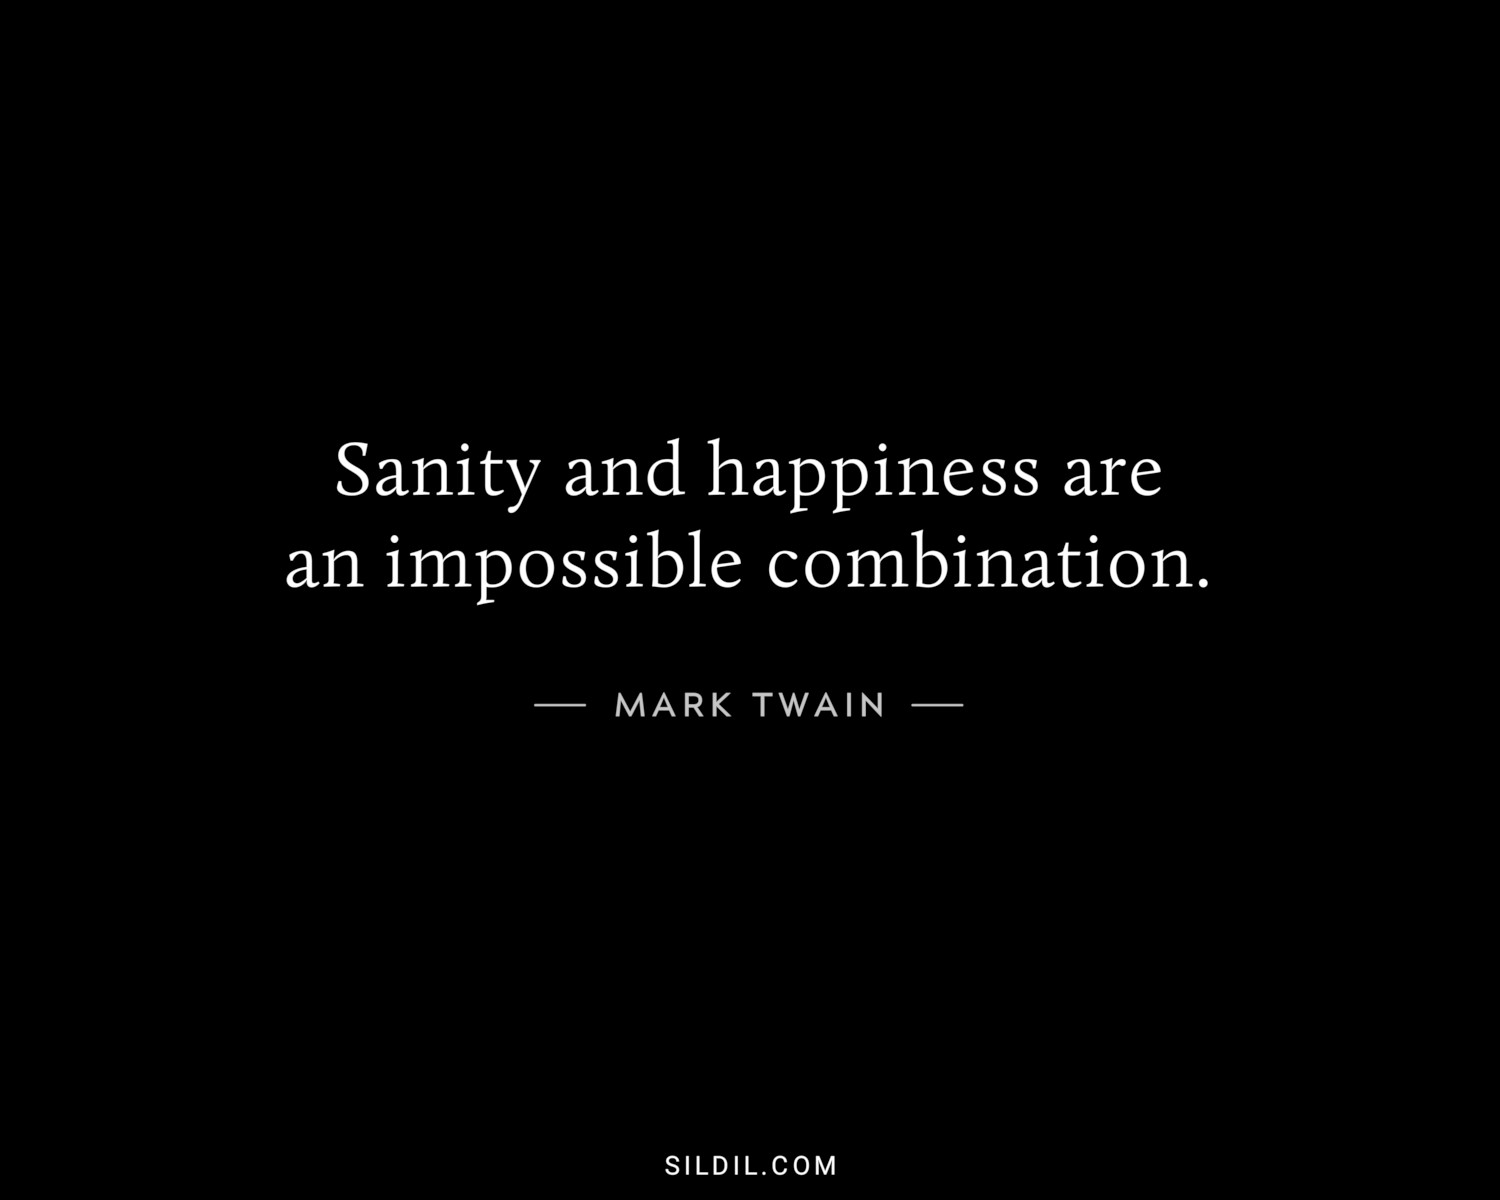 Sanity and happiness are an impossible combination.